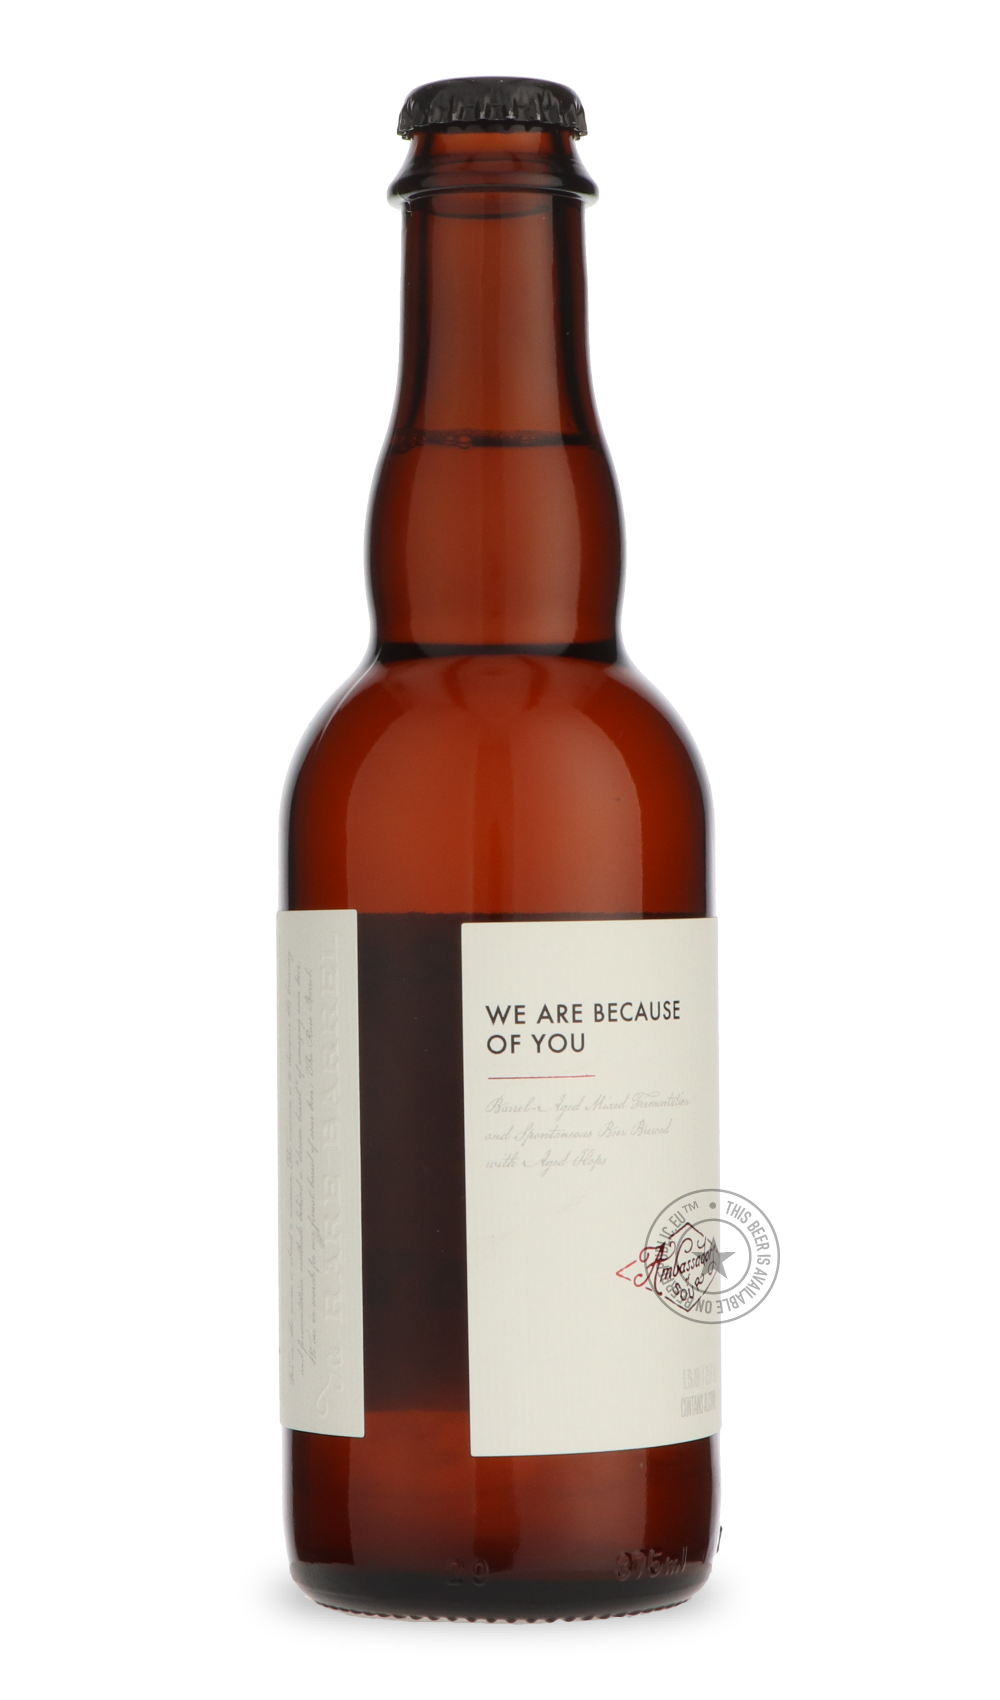 -The Rare Barrel- We Are Because of You 2020-Sour / Wild & Fruity- Only @ Beer Republic - The best online beer store for American & Canadian craft beer - Buy beer online from the USA and Canada - Bier online kopen - Amerikaans bier kopen - Craft beer store - Craft beer kopen - Amerikanisch bier kaufen - Bier online kaufen - Acheter biere online - IPA - Stout - Porter - New England IPA - Hazy IPA - Imperial Stout - Barrel Aged - Barrel Aged Imperial Stout - Brown - Dark beer - Blond - Blonde - Pilsner - Lage